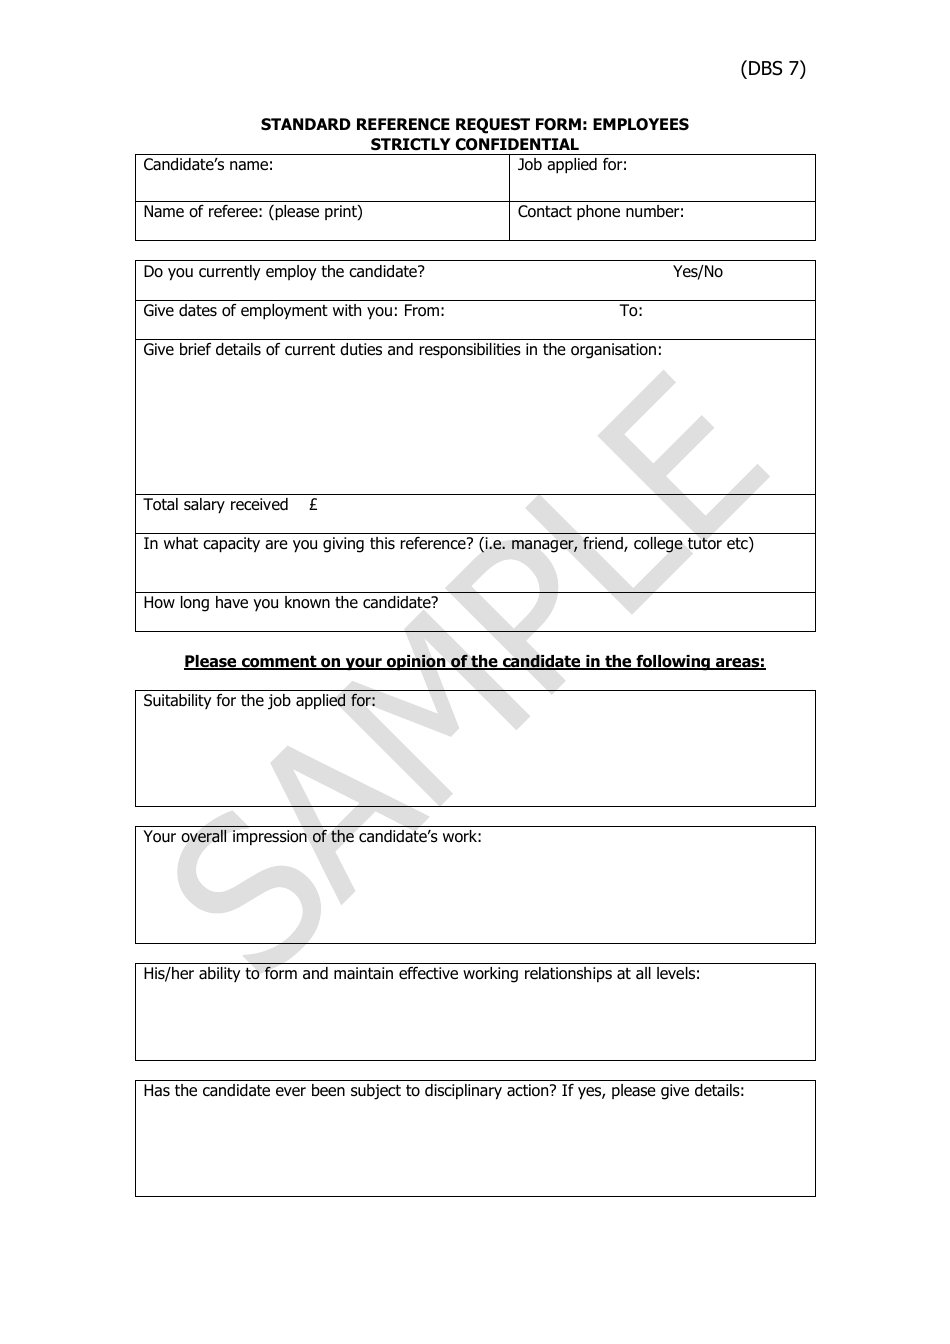 Standard Reference Request Form - Sample, Page 1